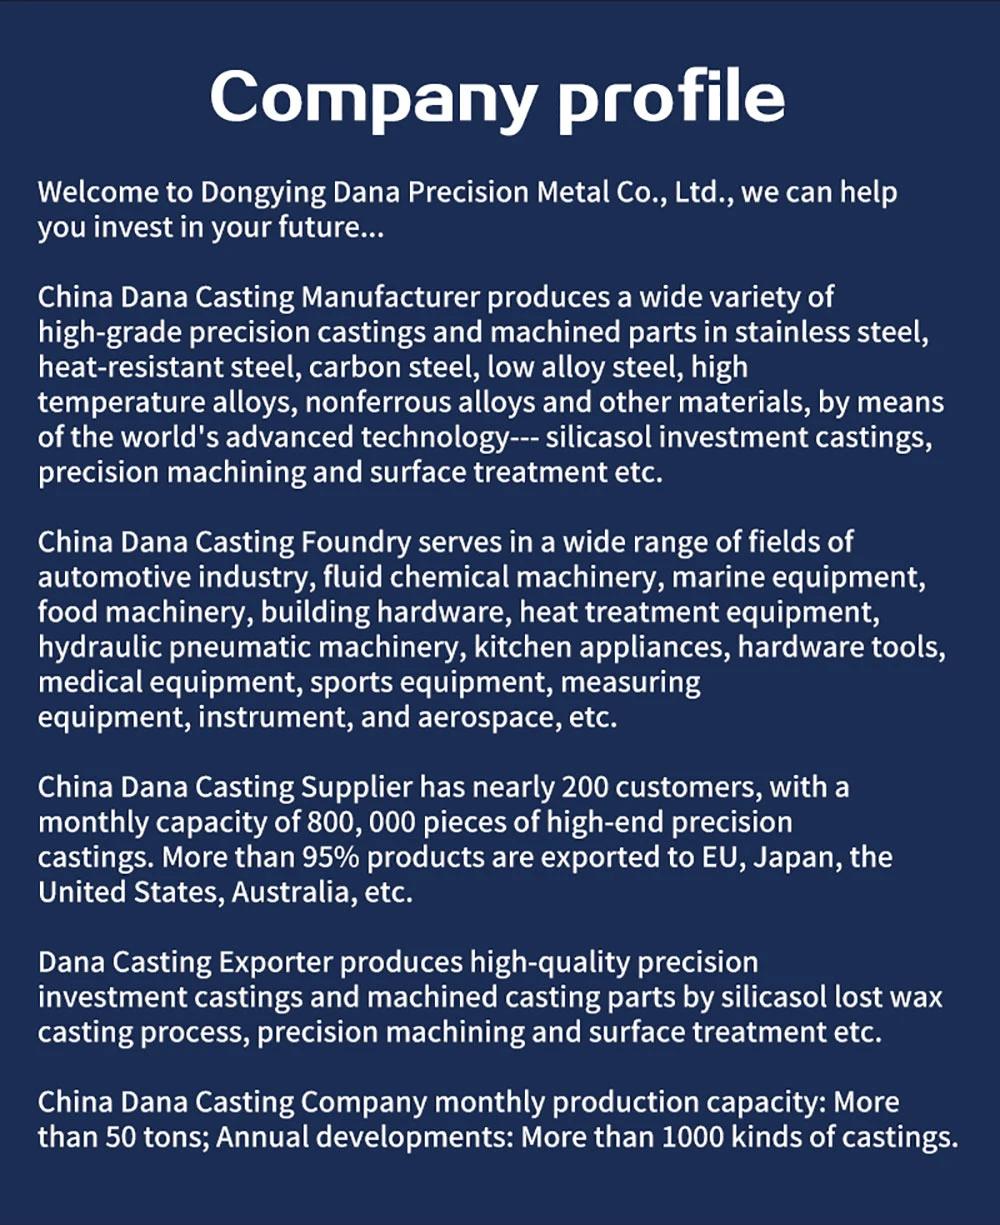 Investment Casting/ Cast/ Lost Wax Casting/ Precision Casting